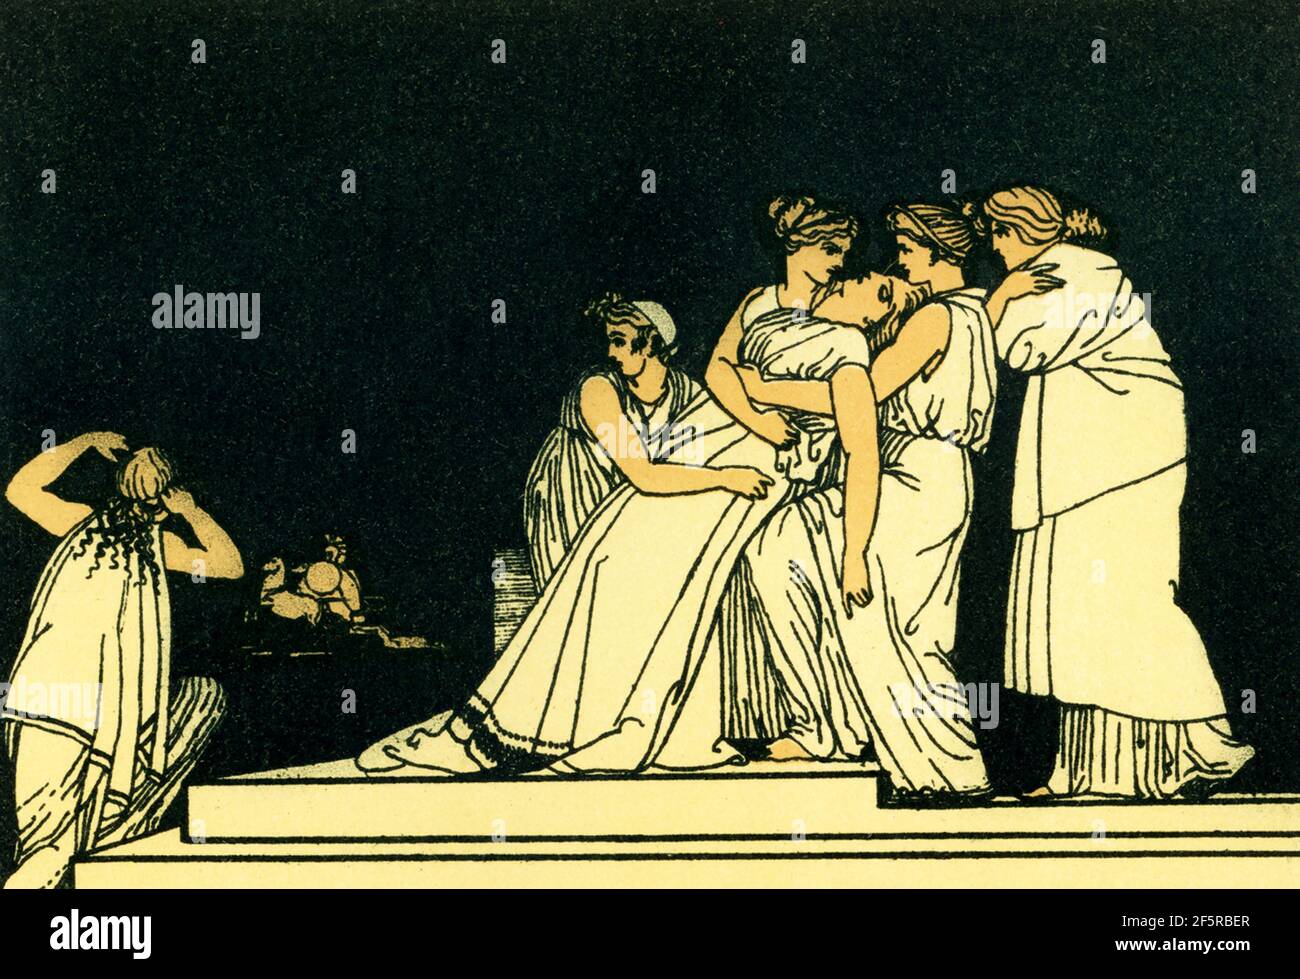 This 1880s illustration accompanied a book on Homer and his epics, the Iliad and the Odyssey. It shows the scene in the Iliad when Andromache faints on walls of Troy. Stock Photo